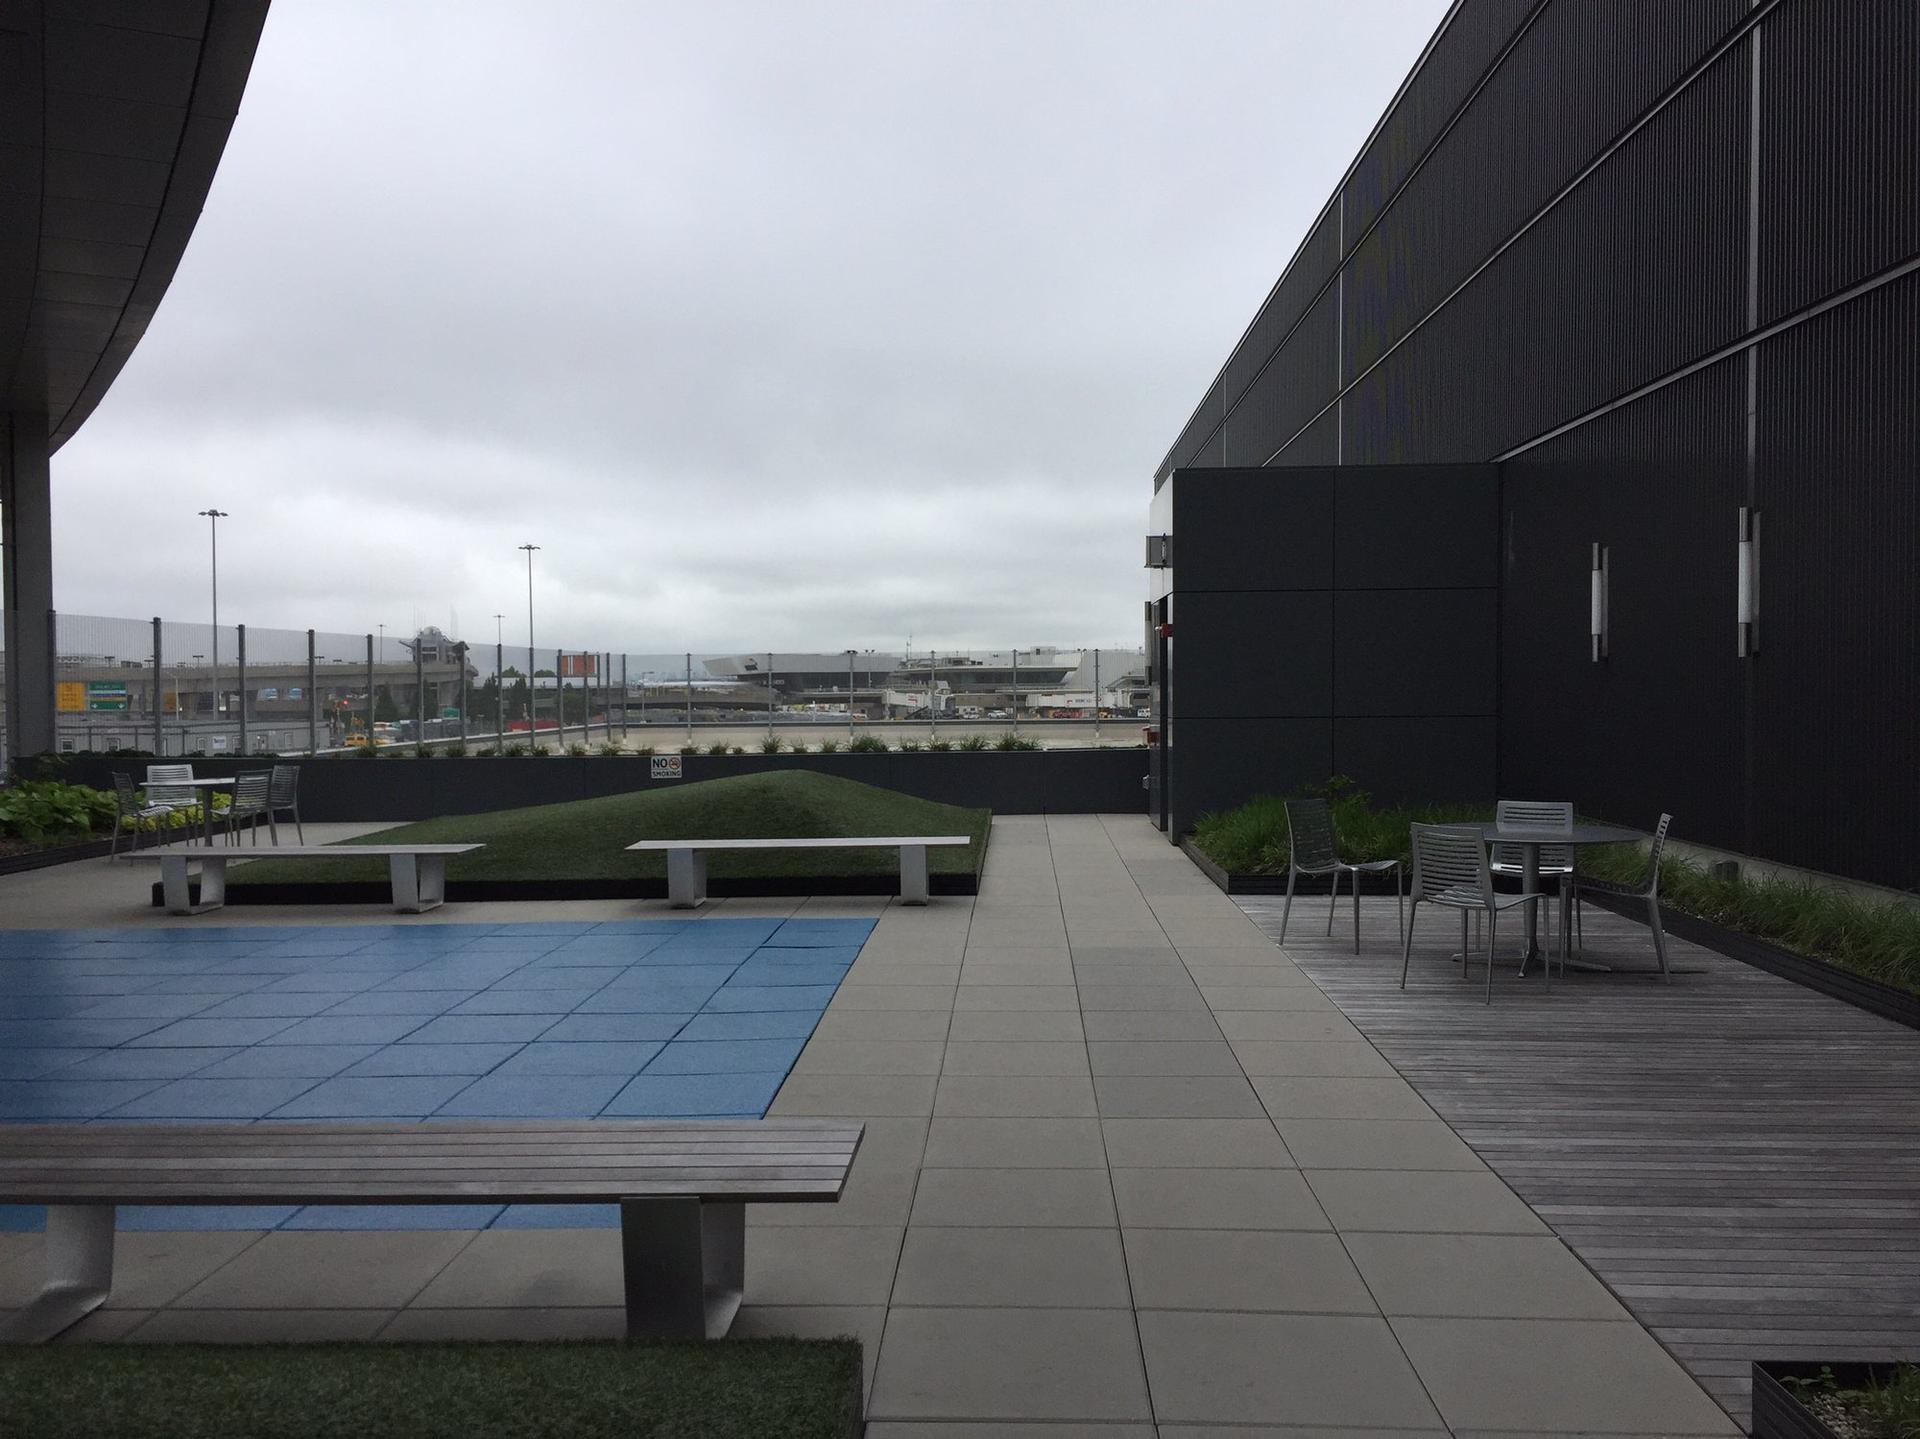 JetBlue Rooftop Terrace image 3 of 22